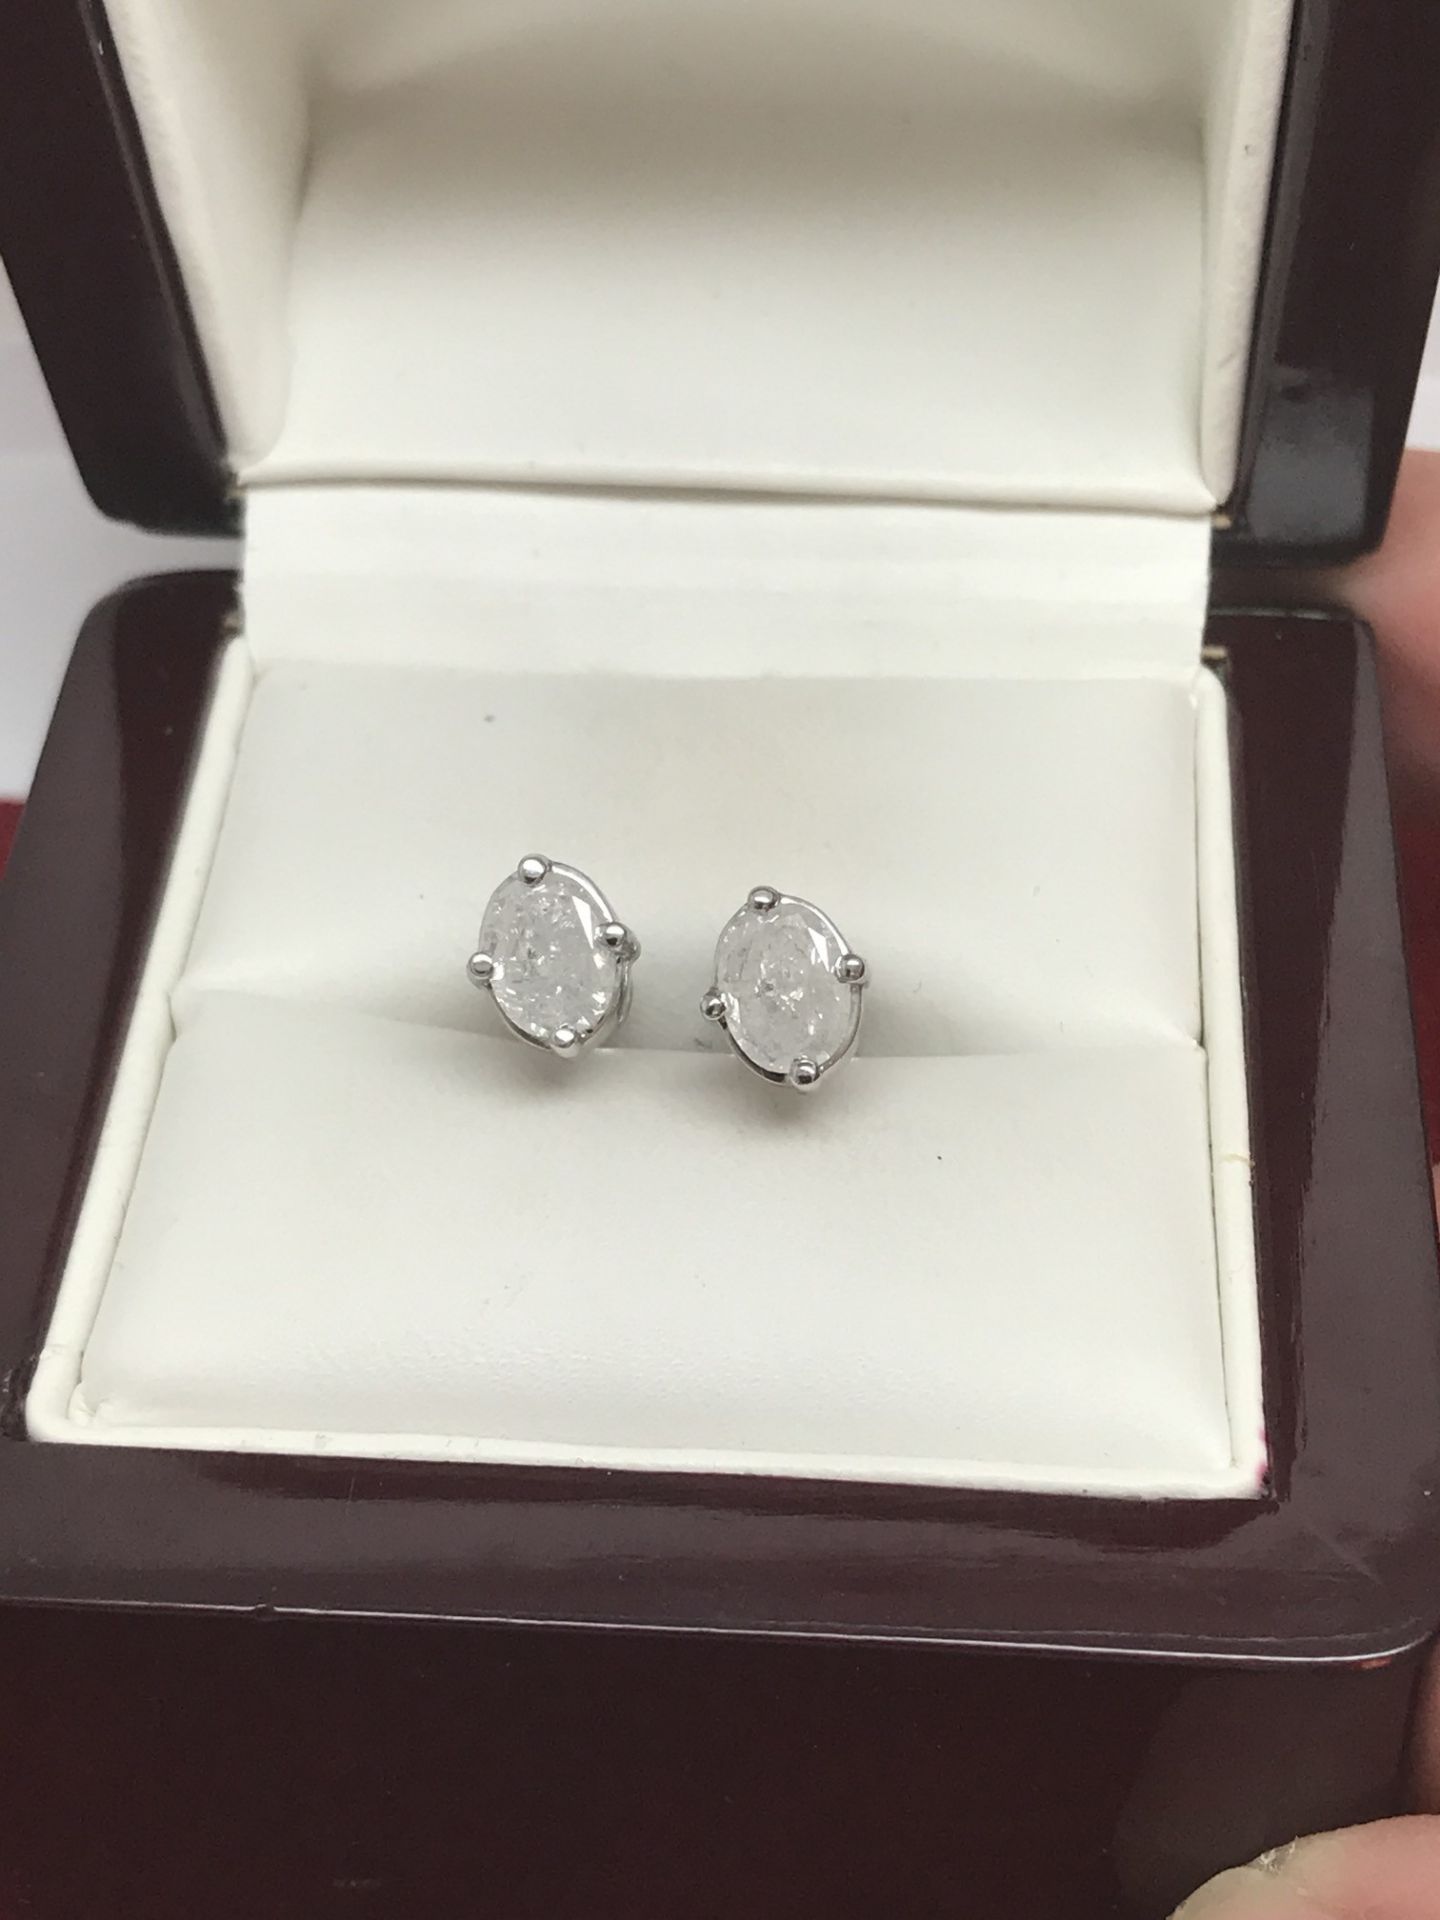 1.45ct DIAMOND EARRINGS SET IN WHITE METAL MARKED 750 TESTED AS 18ct